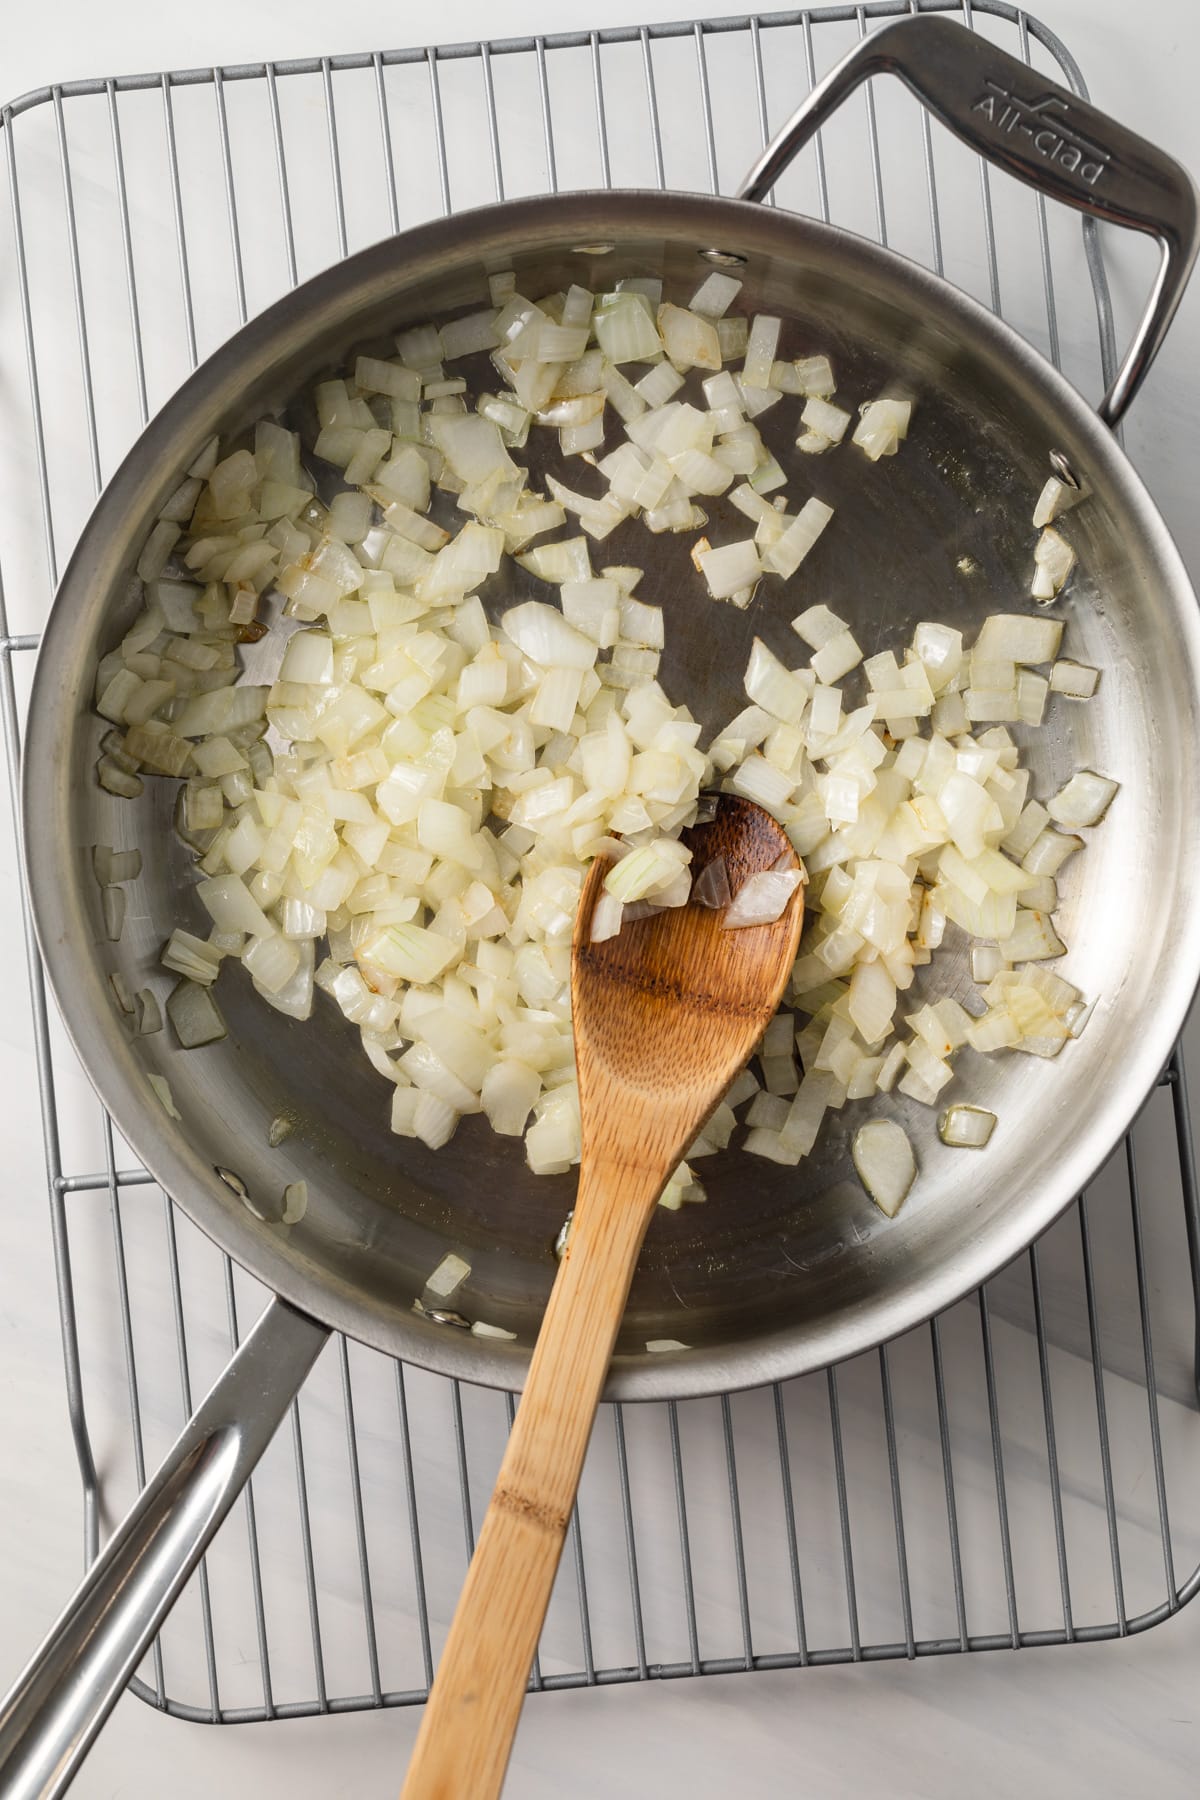 Sauteed onions in skillet.